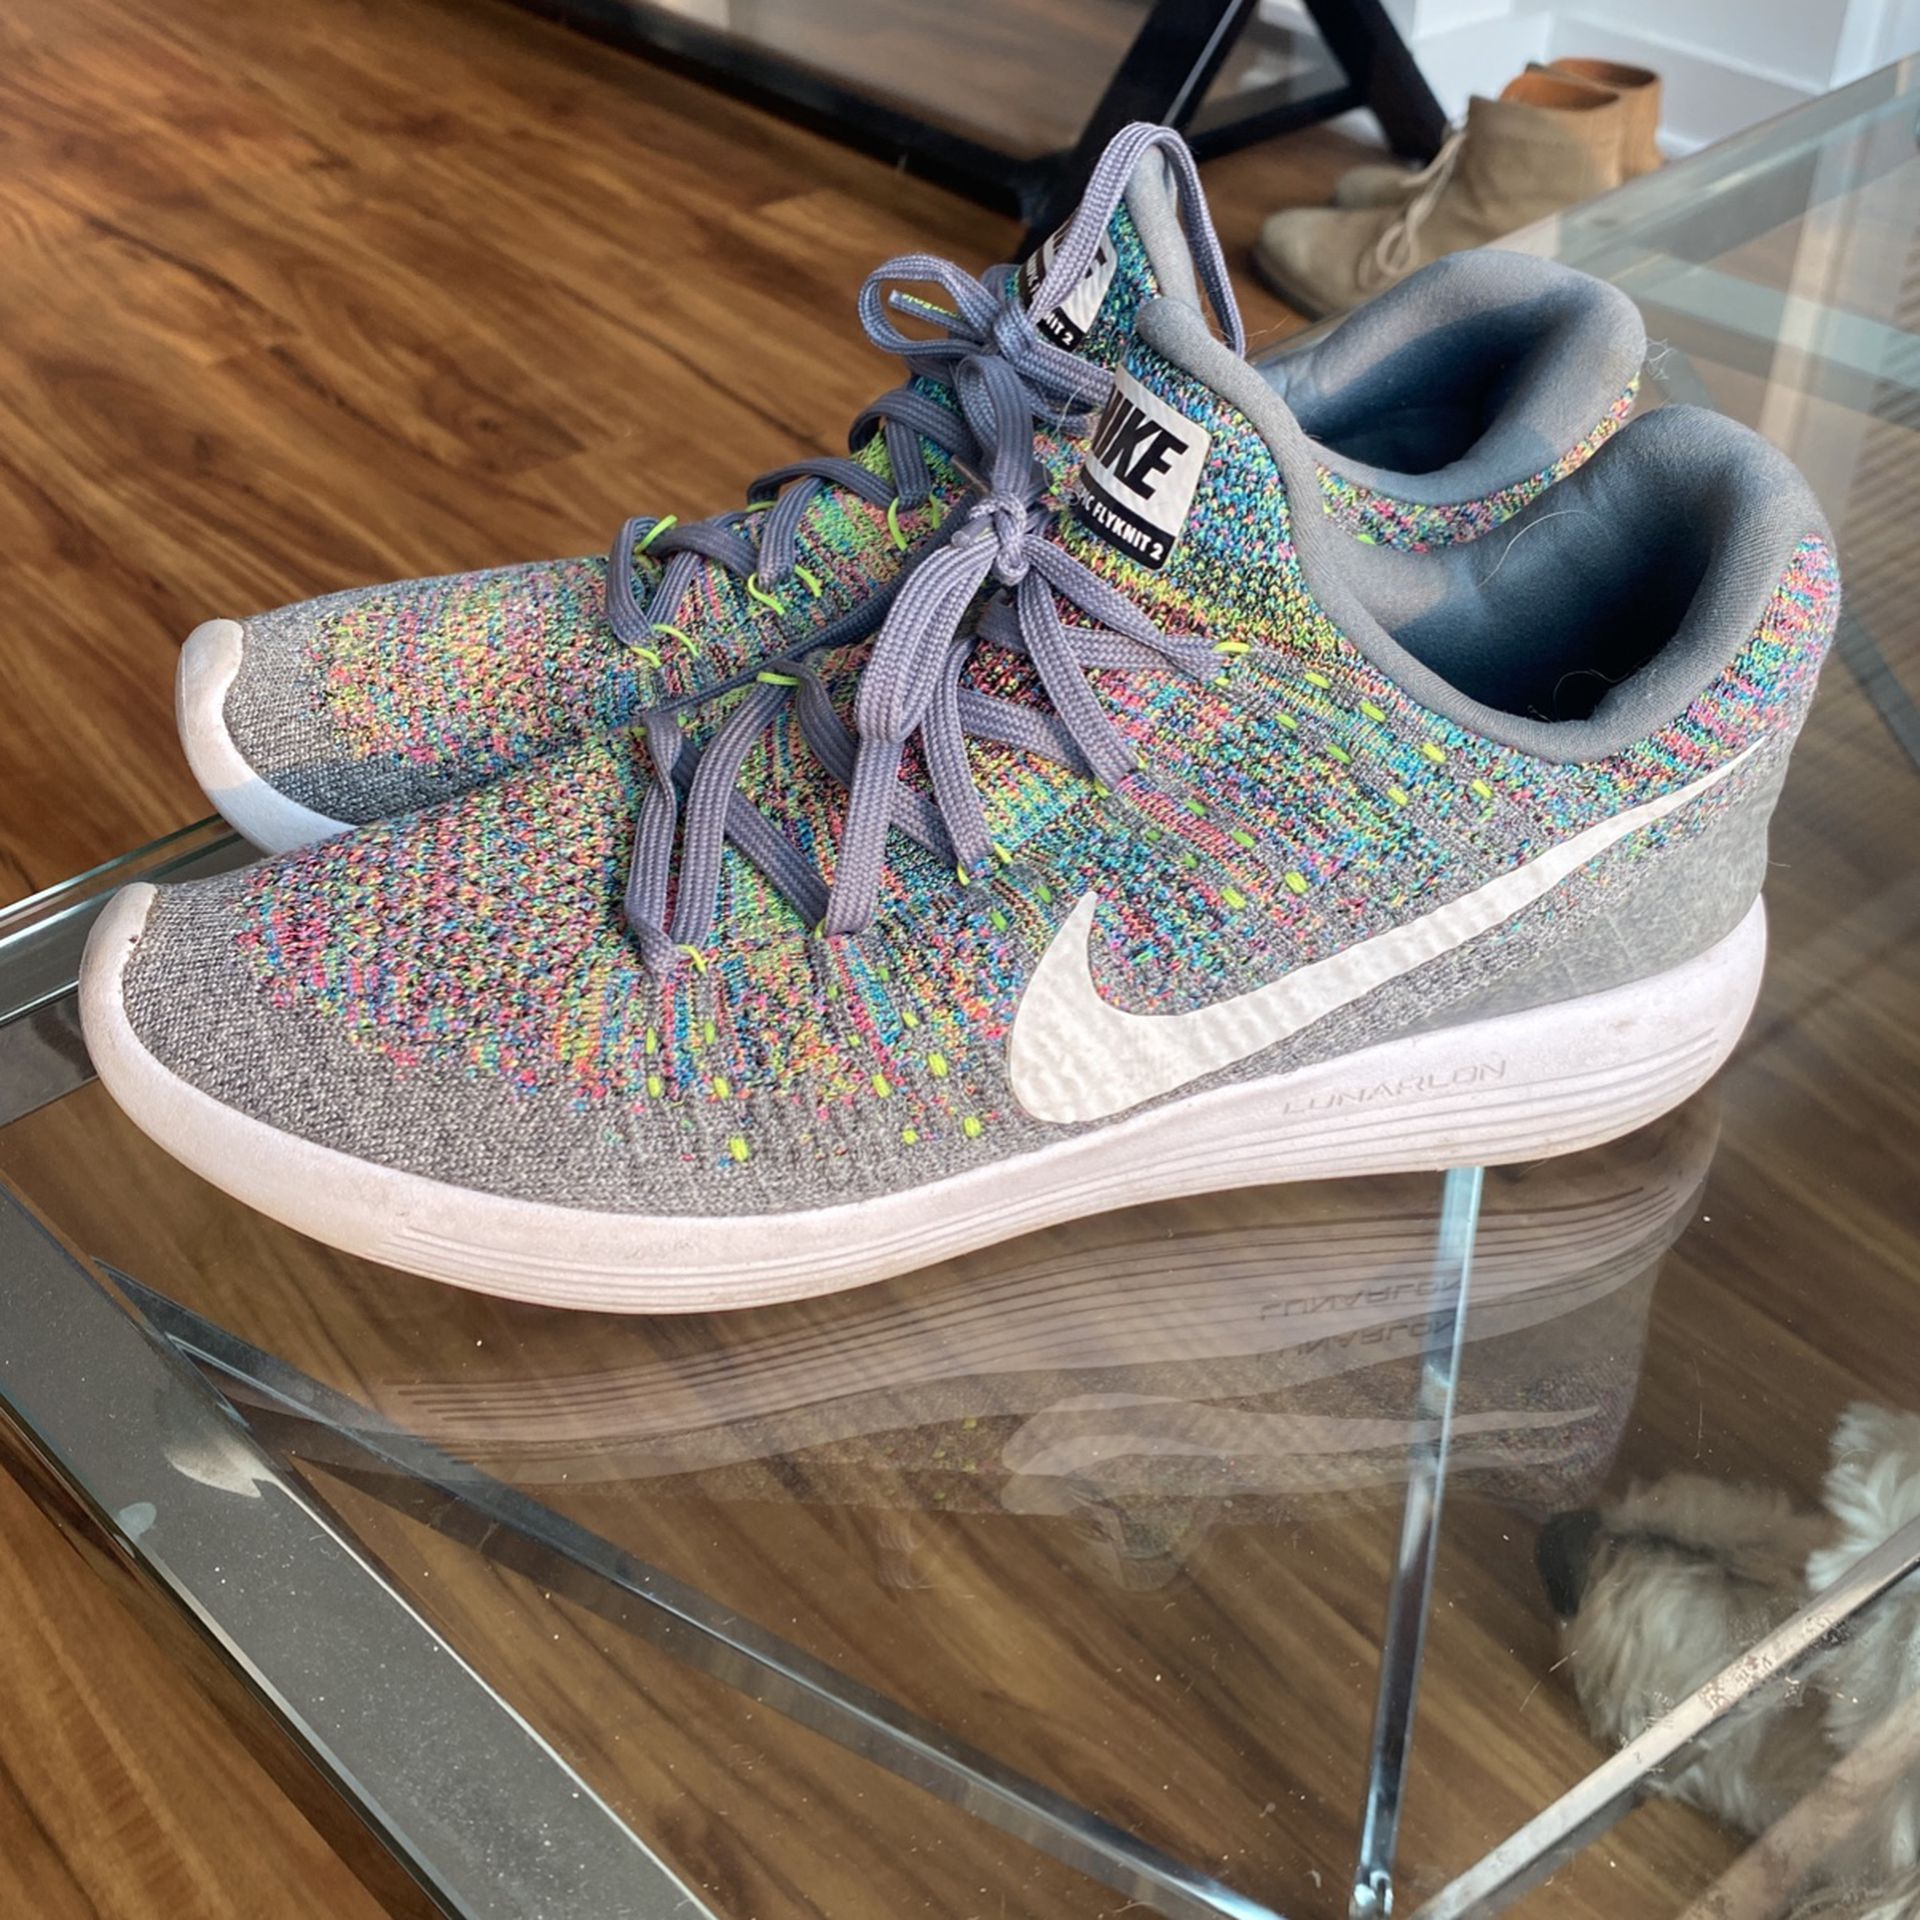 TAKING BEST OFFER! Nike Flyknit 2 for Sale in Middle City West, PA - OfferUp